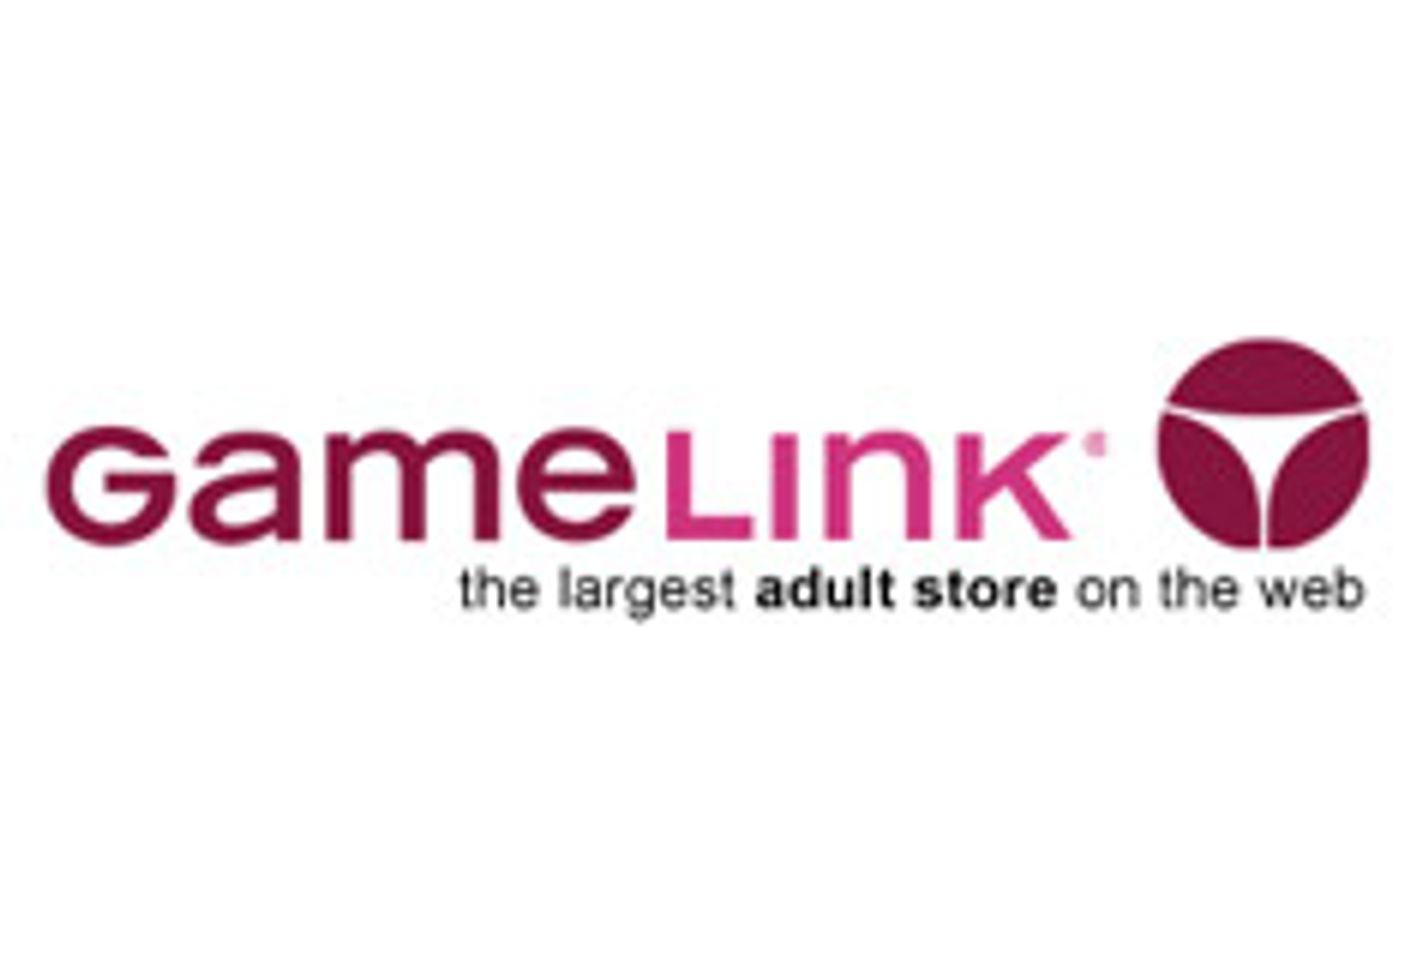 GameLink: New Look, New Search, and More